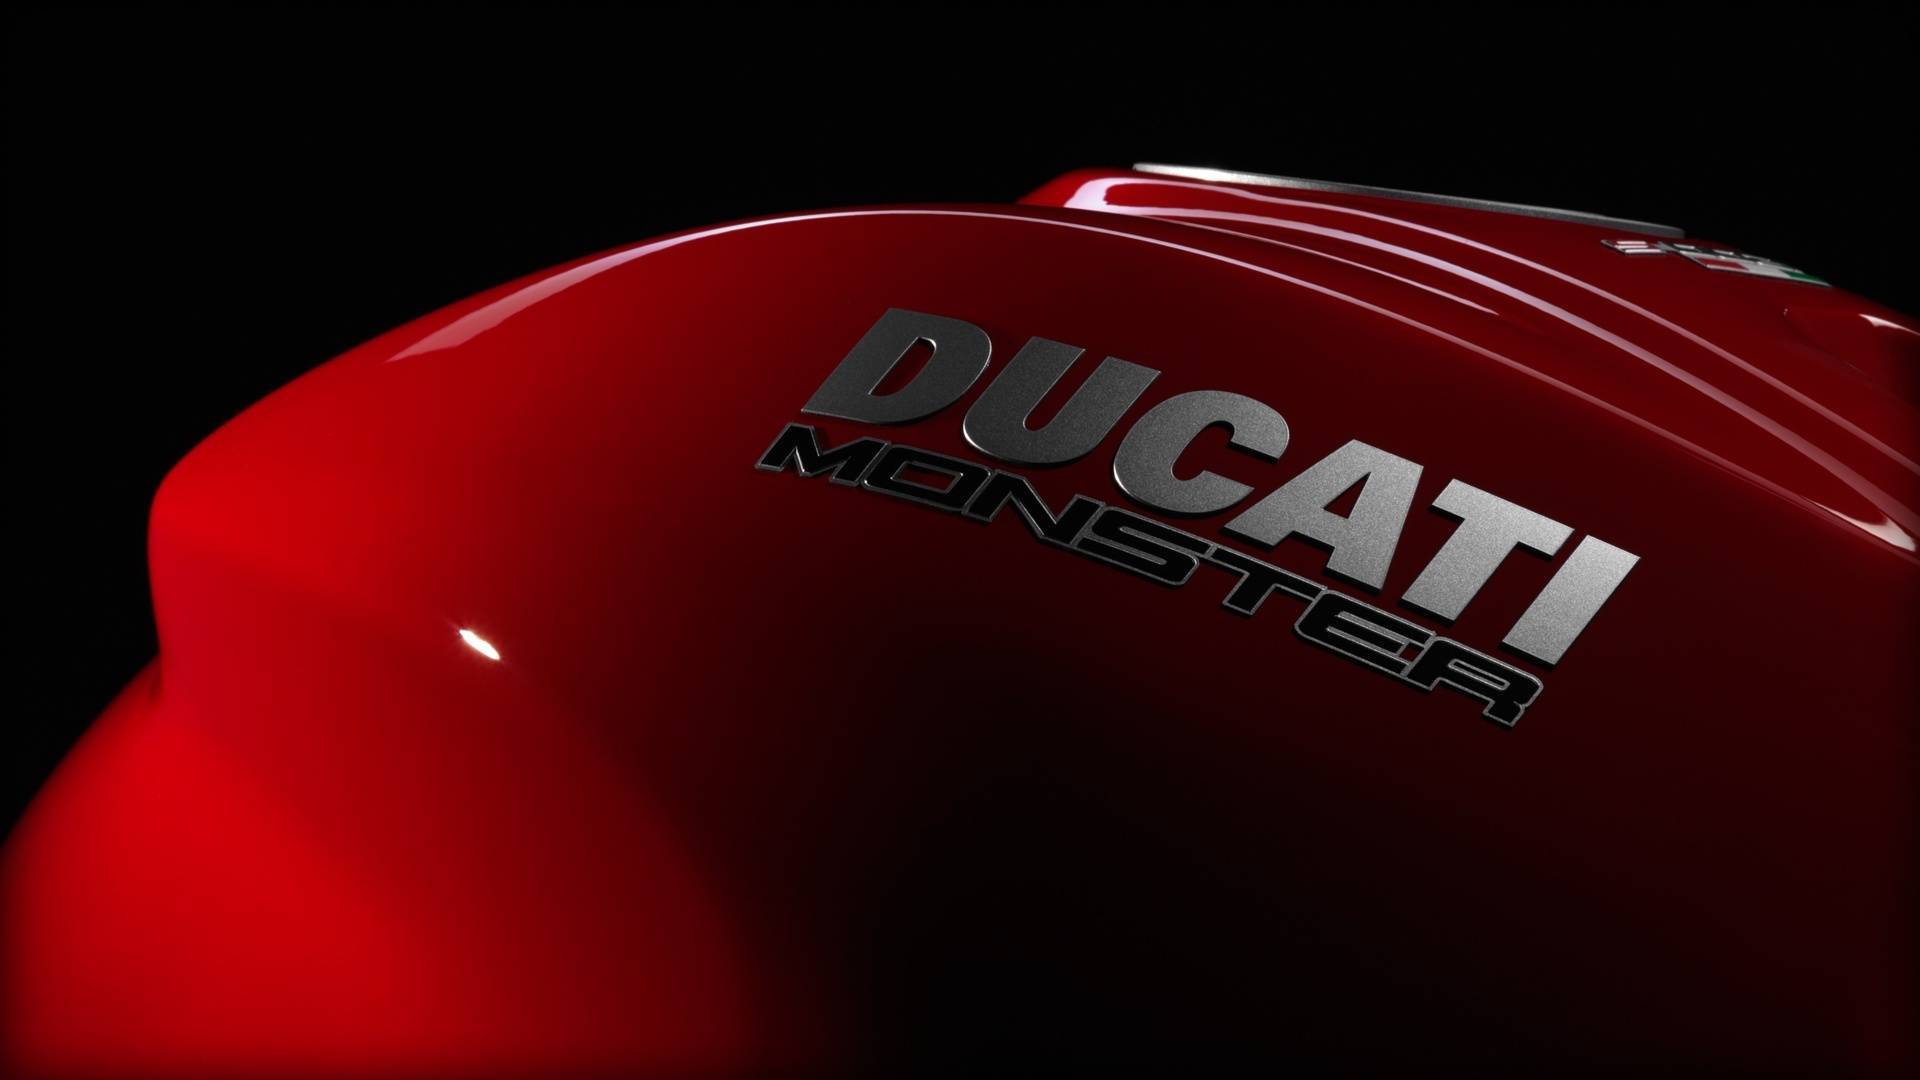 Ducati Monster 1200 Price, Mileage, Review